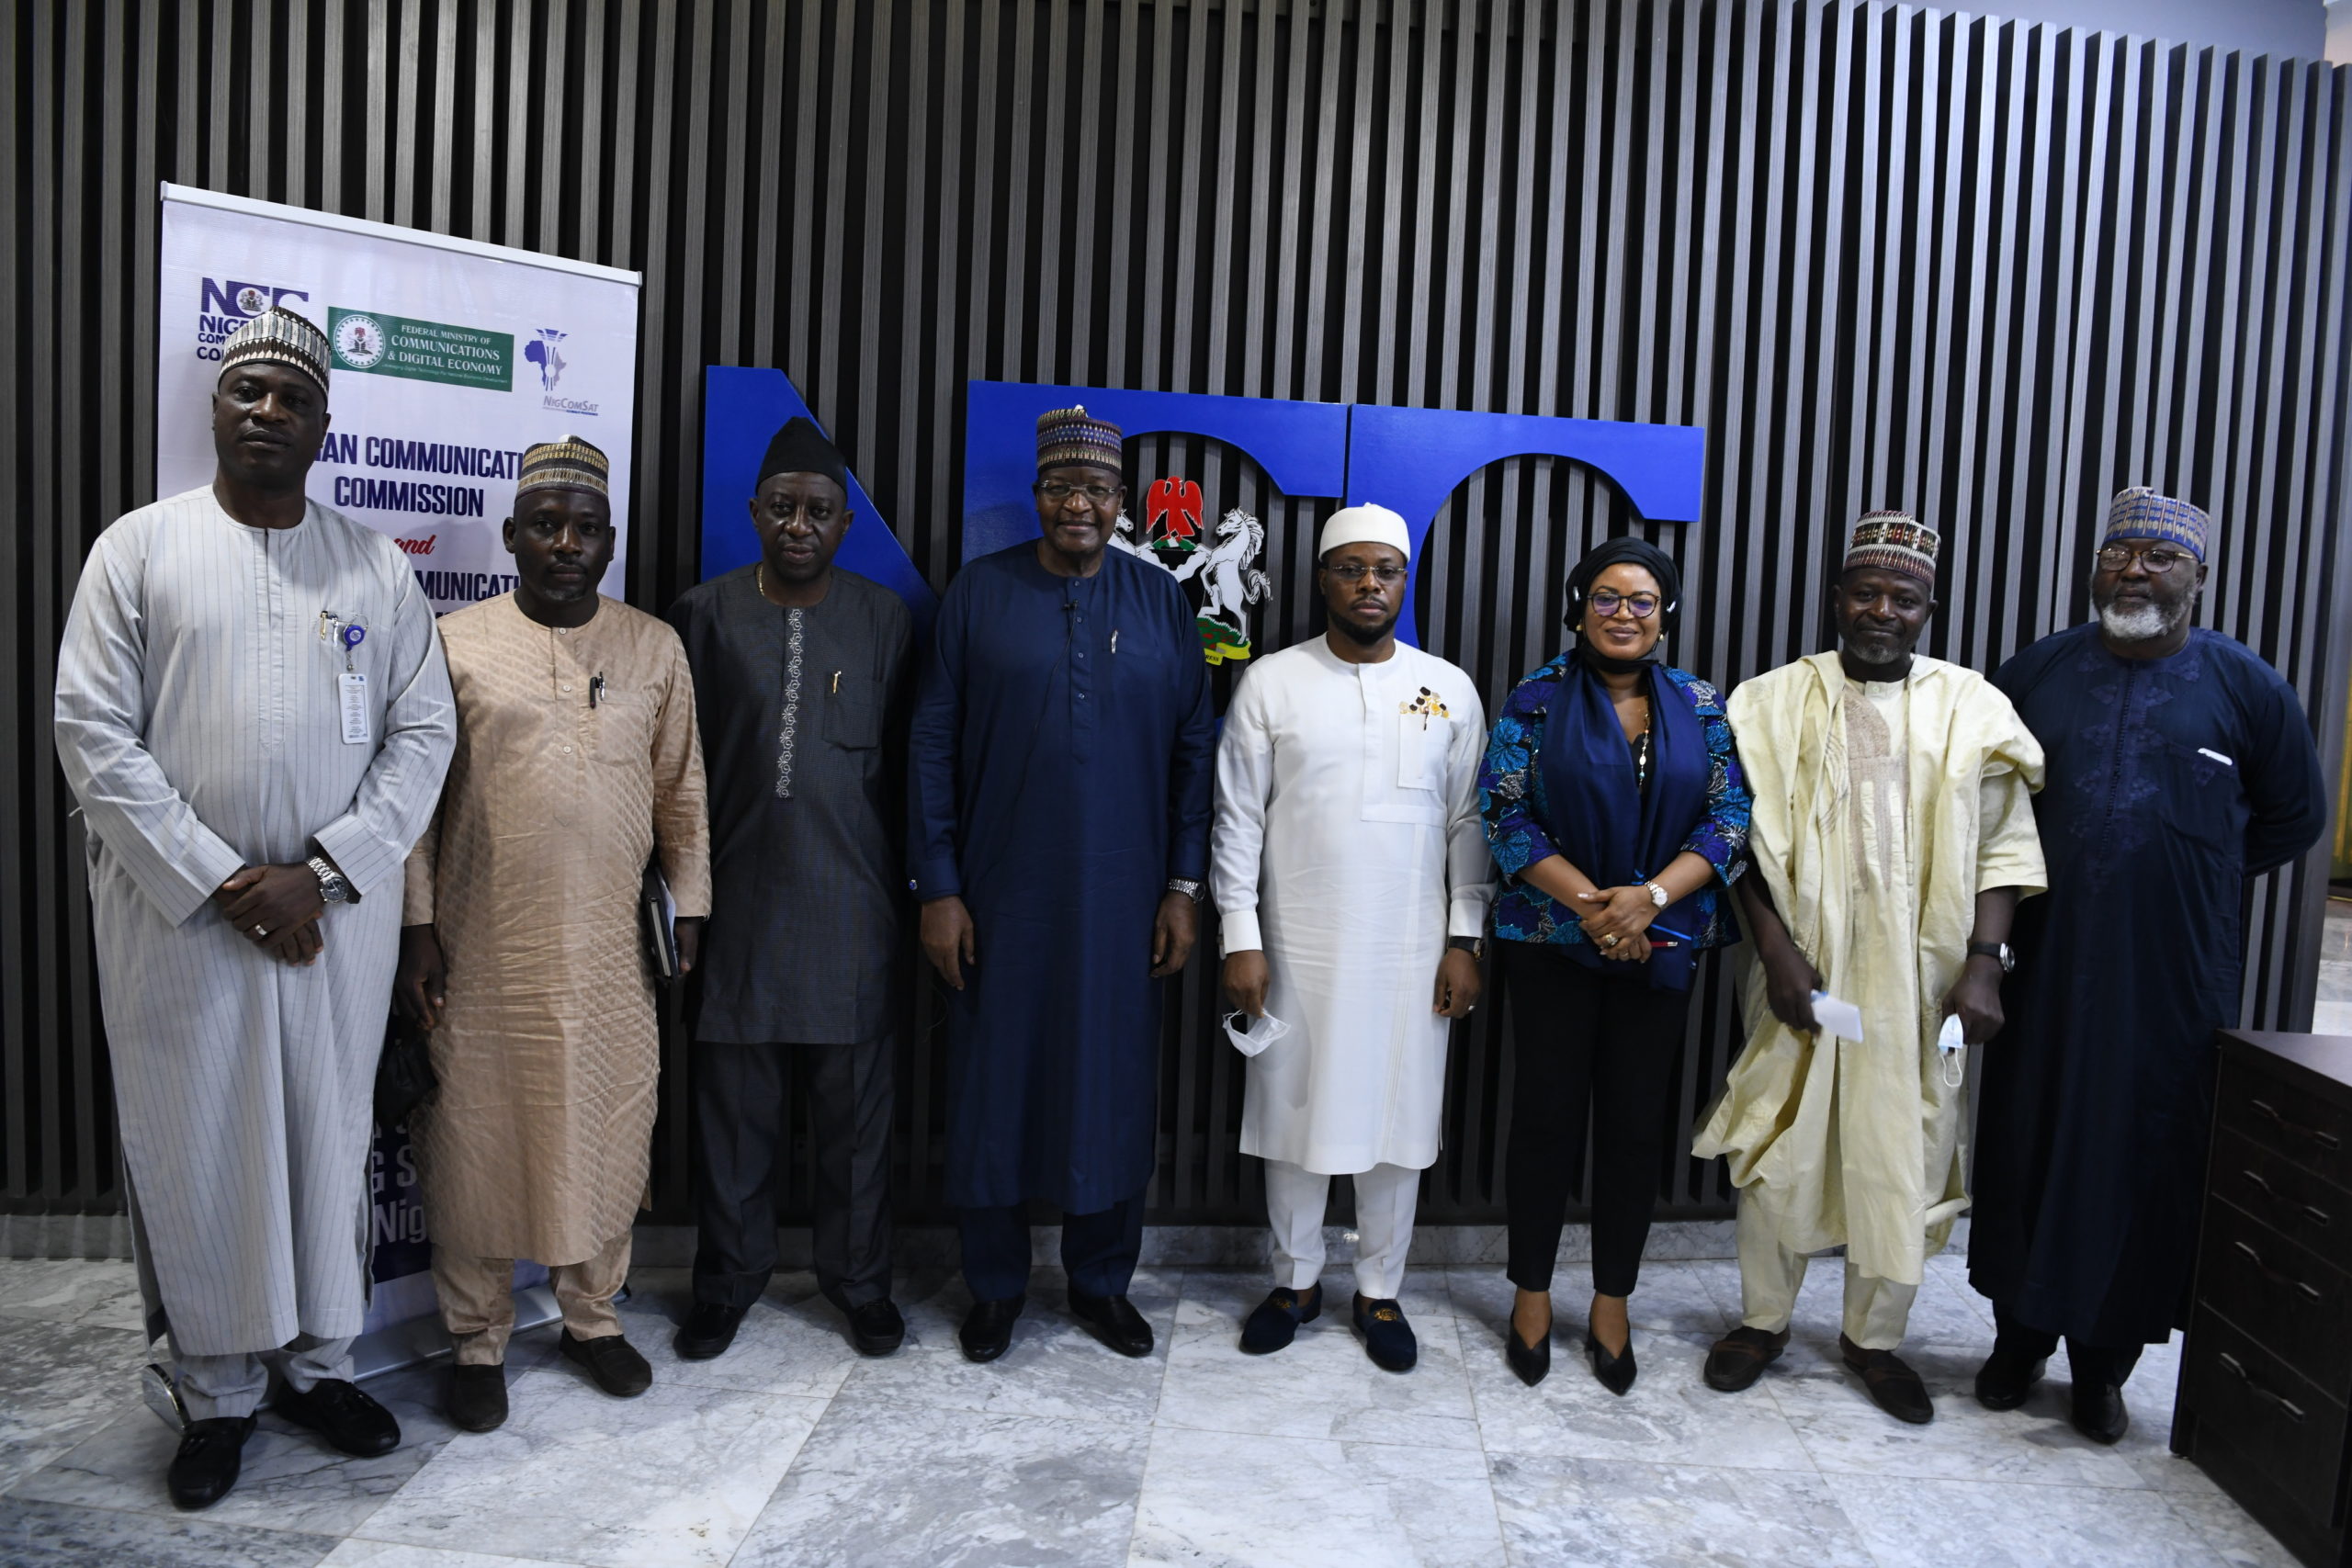 L-R: Engr. Oluwatoyin Asaju, Director, Spectrum Administration, Nigerian Communications Commission (NCC); Mr. Hadi Muhammad, Executive Director, Finance and Accounts, Nigerian Communications Satellite (NIGCOMSAT); Mr. Adeleke Adewolu, Executive Commissioner, Stakeholder Management, NCC; Prof. Umar Garba Danbatta, Executive Vice Chairman/CEO, NCC; Chief Uche Onwude, Member, NCC Board of Commissioners; Dr. Abimbola Alale, Managing Director, NIGCOMSAT; Prof Abdu Bambale, Executive Director, Technical, NIGCOMSAT, and Engr. Ubale Maska, Executive Commissioner, Technical Services, NCC, during the signing of a Memorandum of Understanding (MoU) on Fifth Generation (5G) spectrum on Wednesday in Abuja.